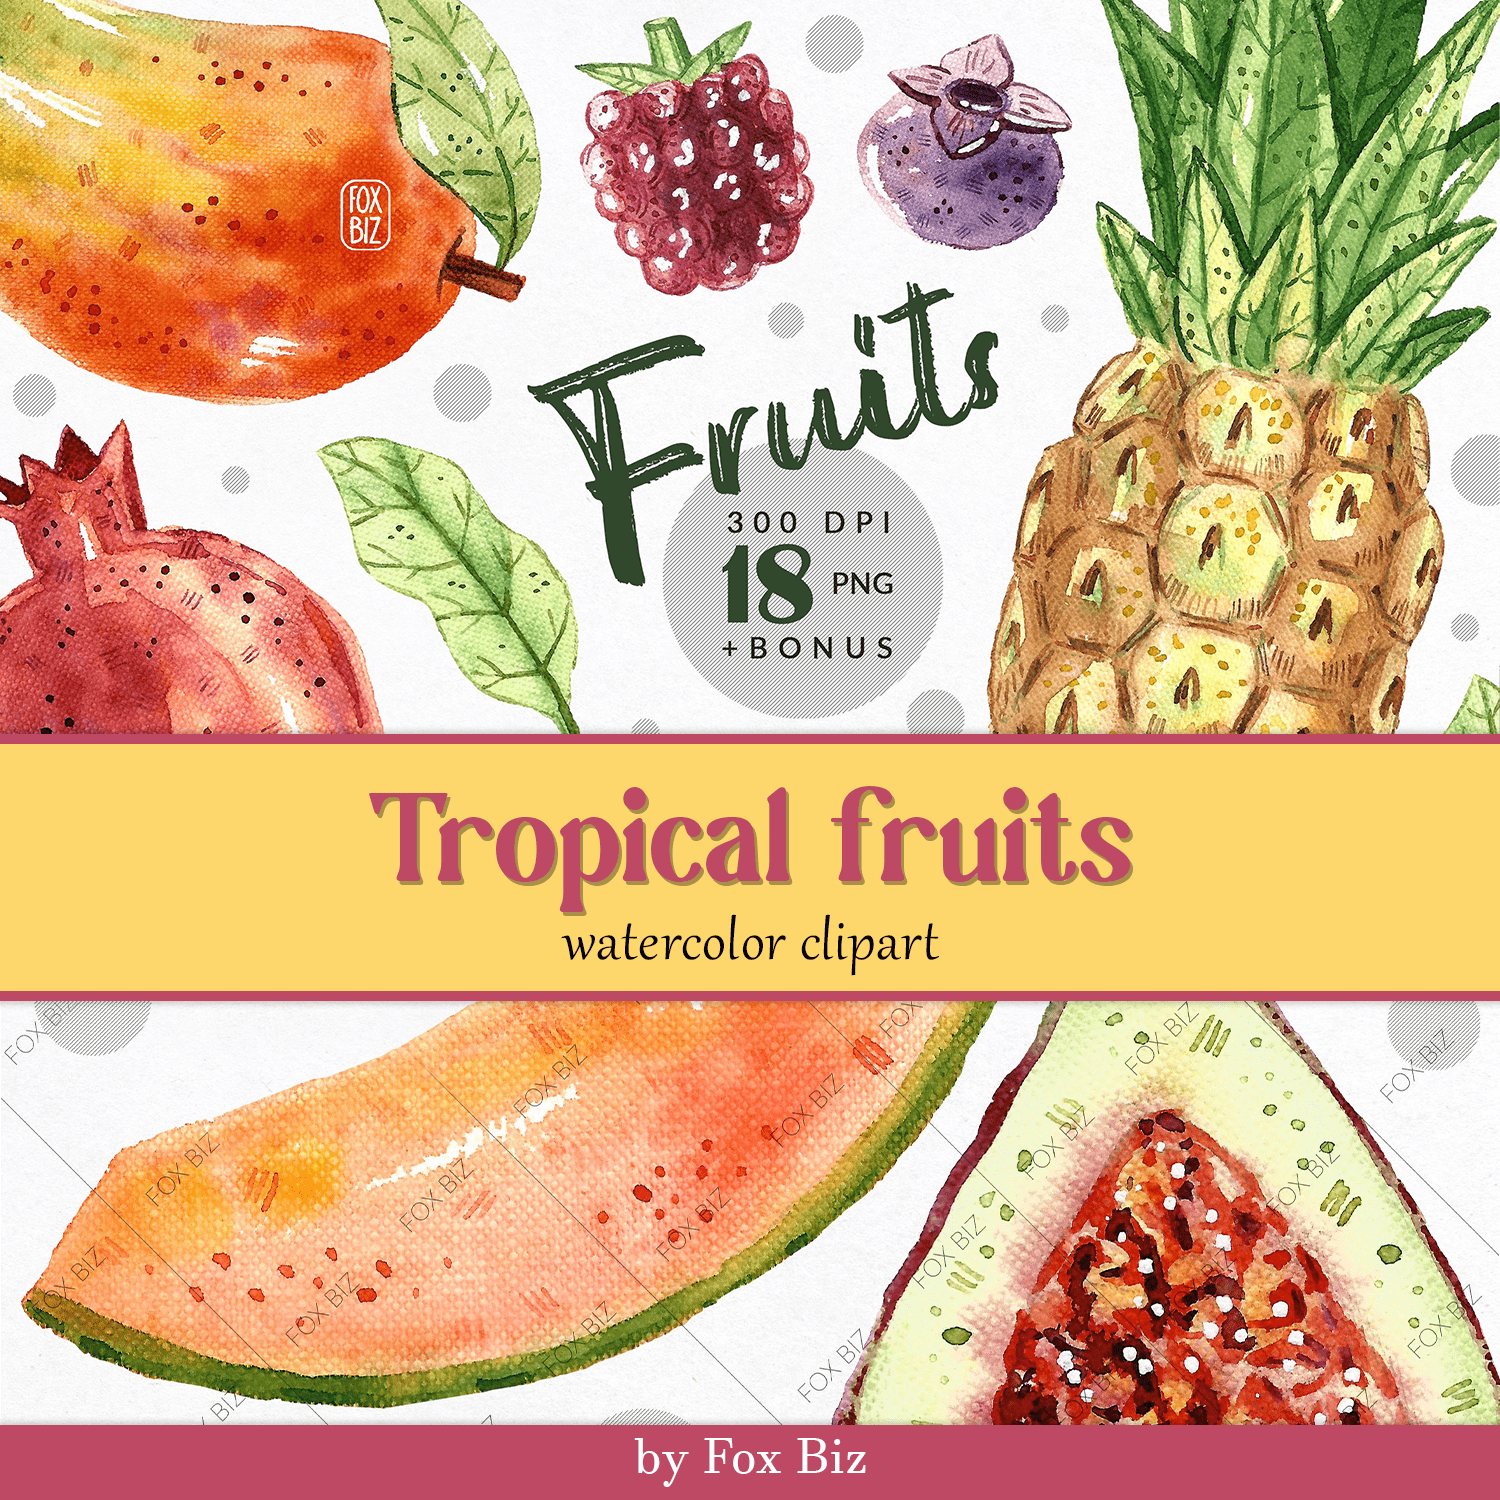 Tropical fruits watercolor clipart - main image preview.